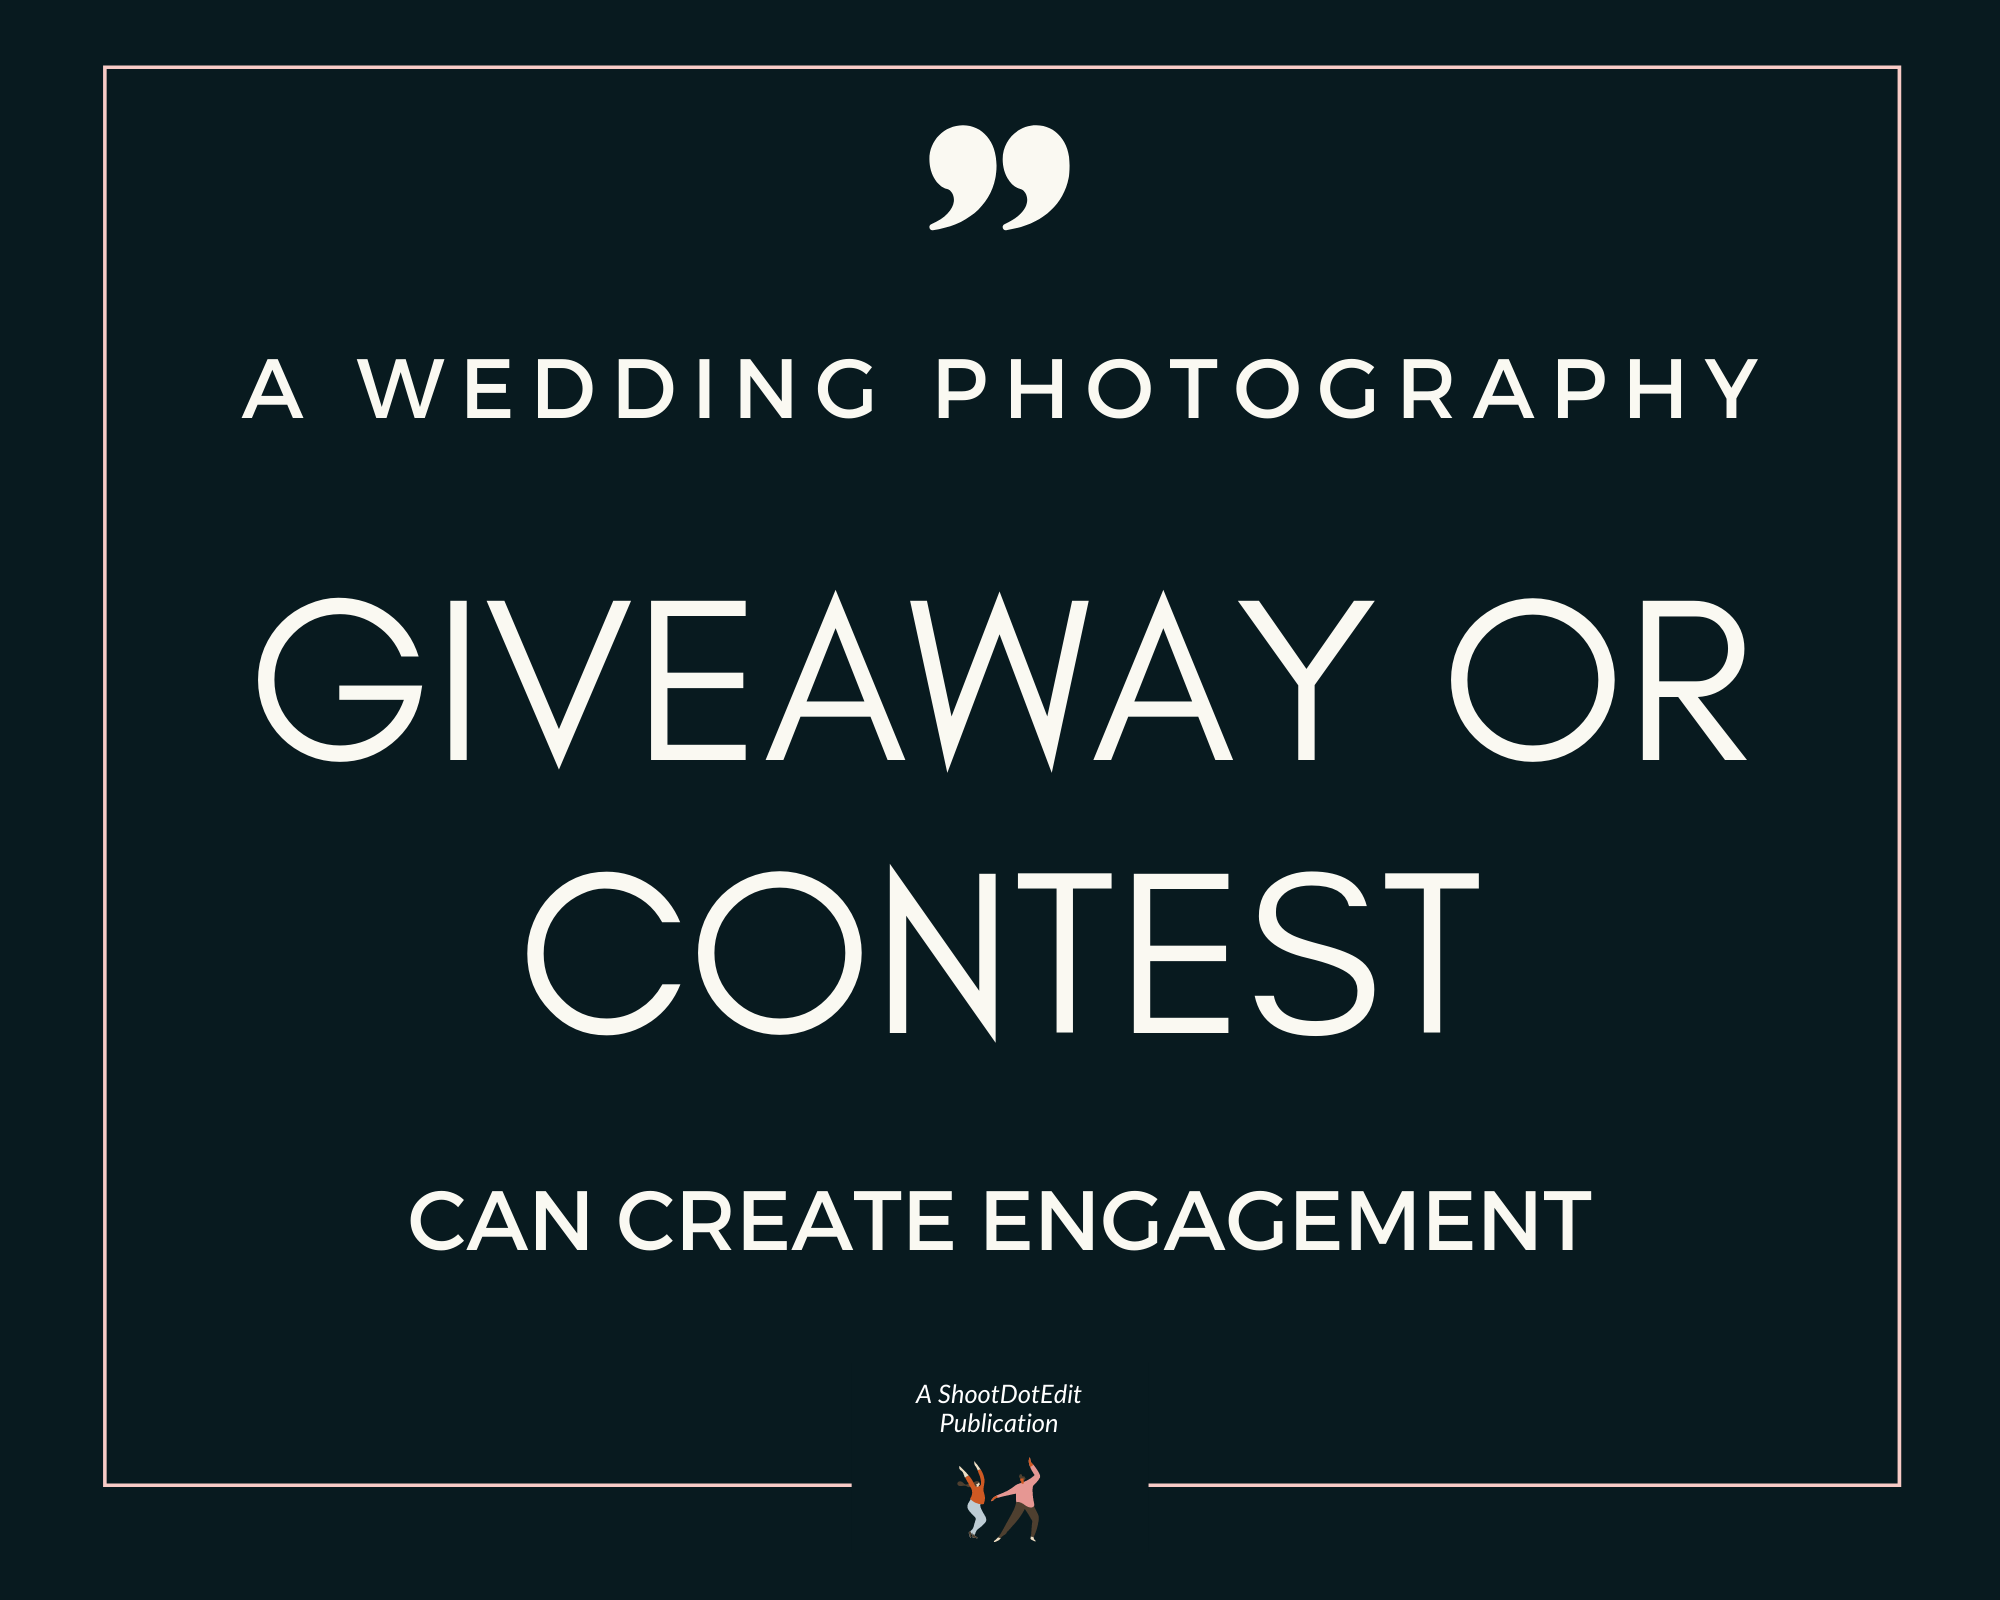 Infographic stating a wedding photography giveaway or contest can create engagement